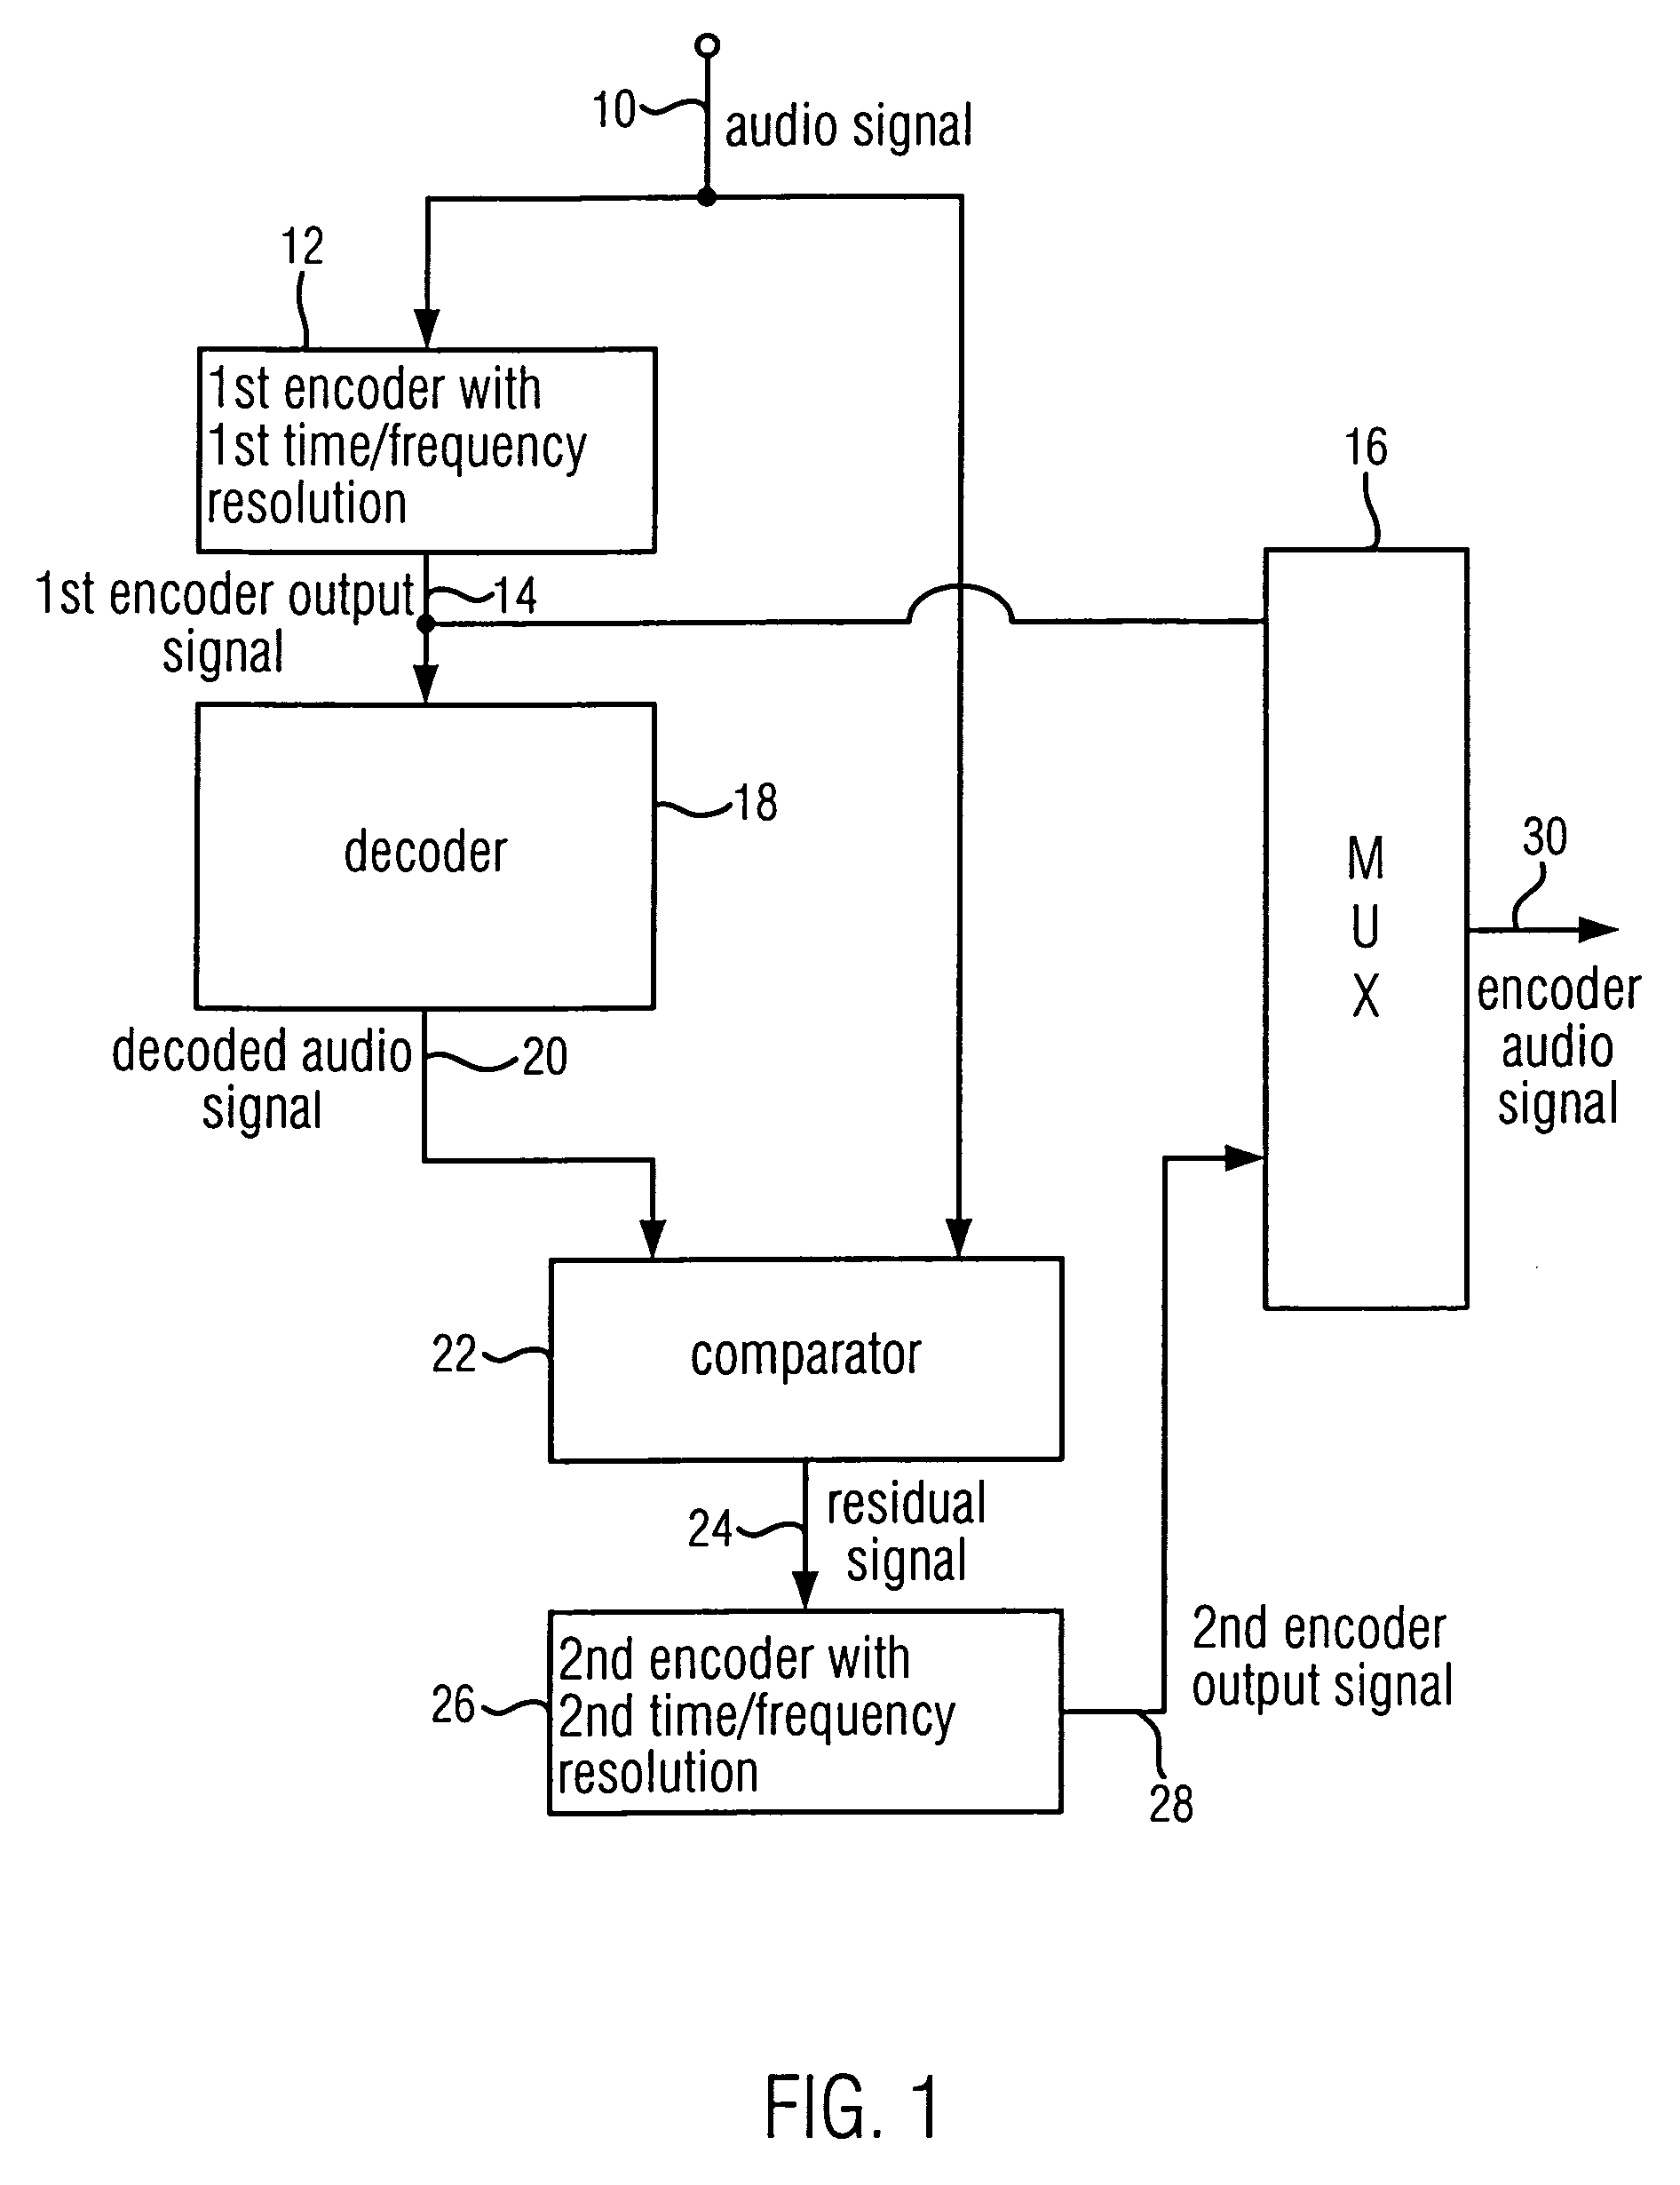 Apparatus and method for encoding an audio signal and apparatus and method for decoding an encoded audio signal